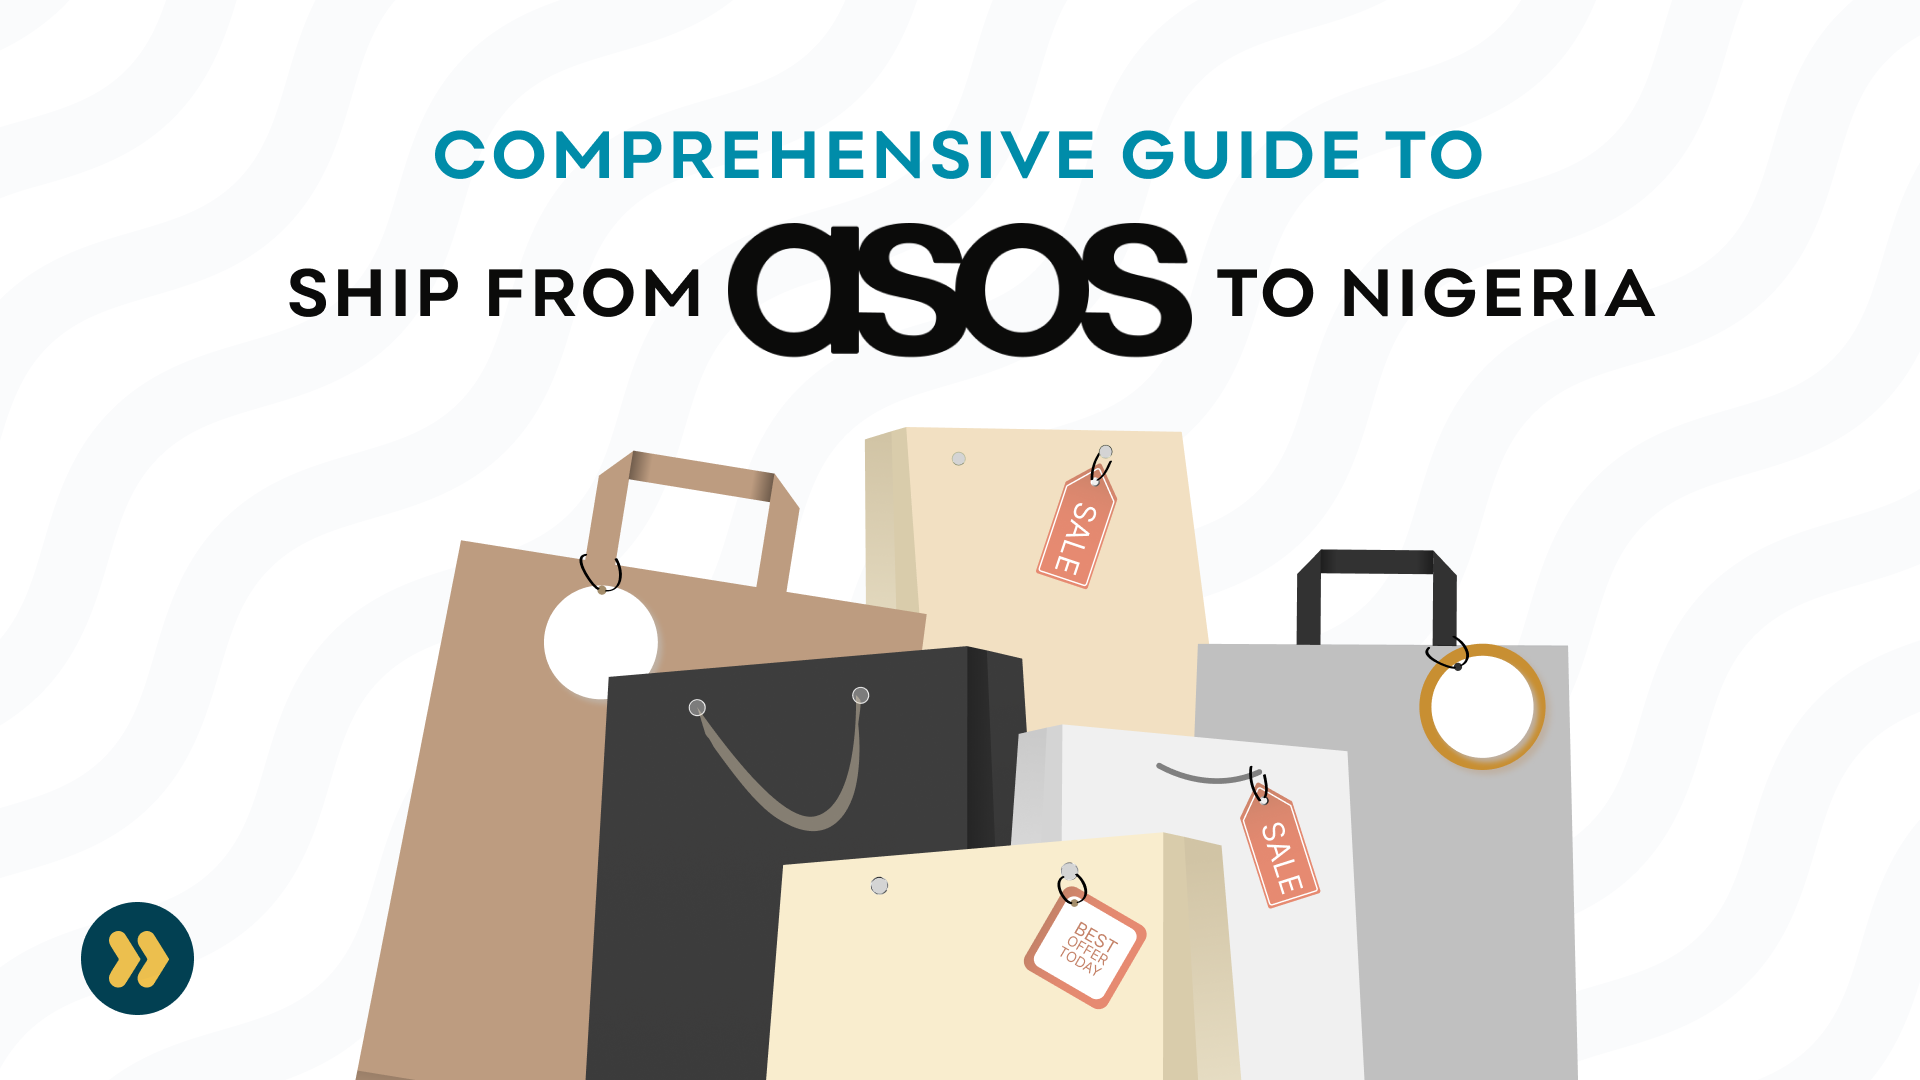 A Comprehensive Guide To Ship From ASOS to Nigeria